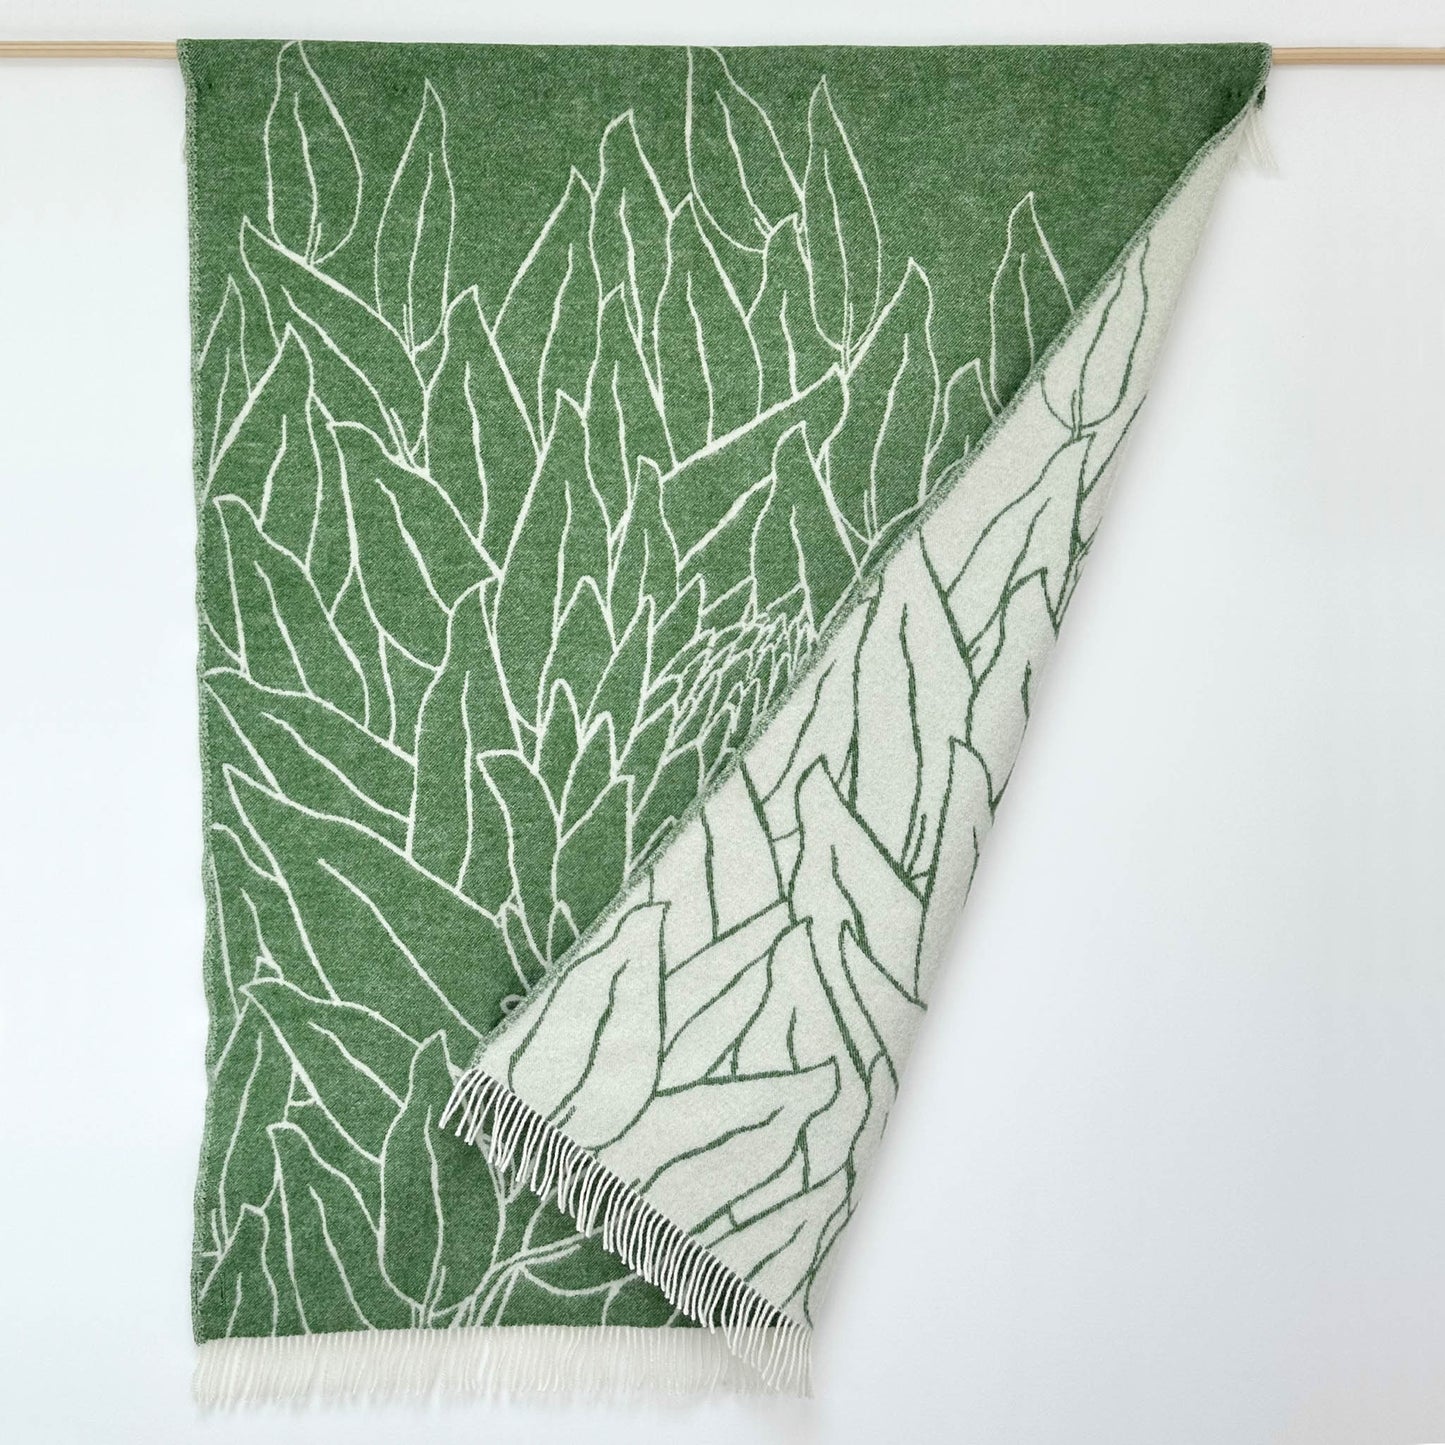 NORDIC CHILL Protea 100% Wool Throw 130x170cm, Forest Green (6797448249409)